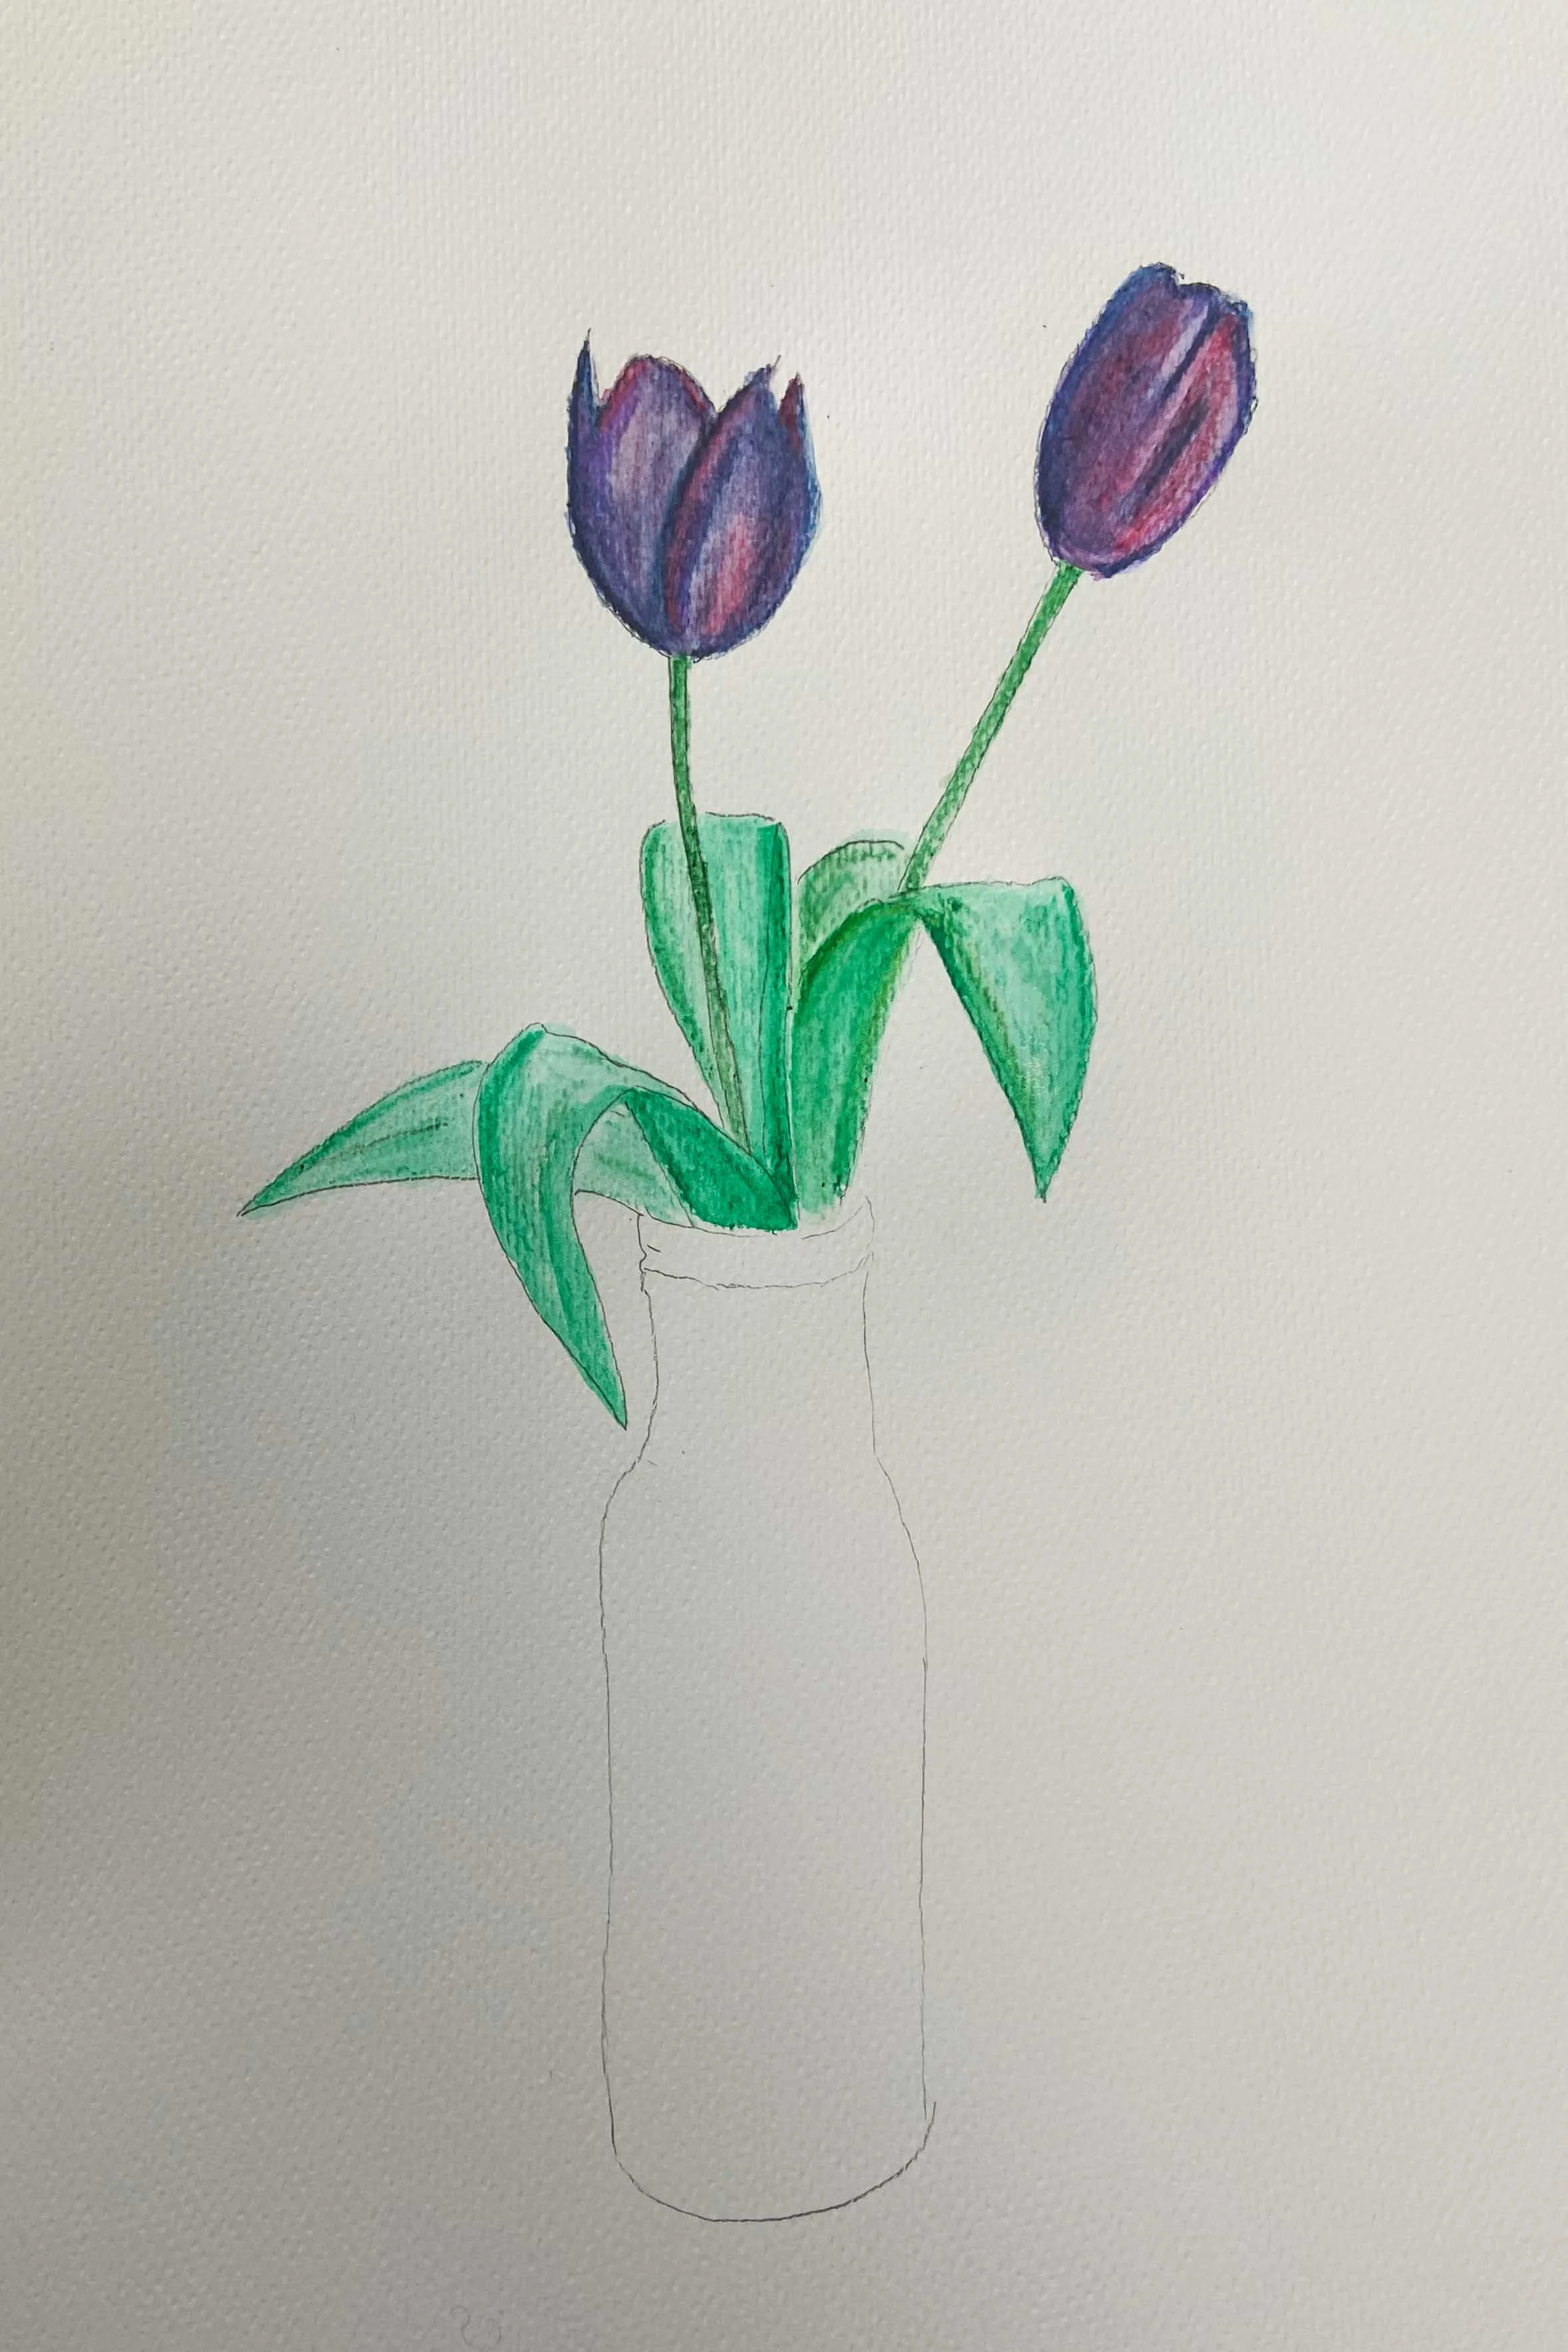 Painting drawn tulips in a vase with watercolour pencils